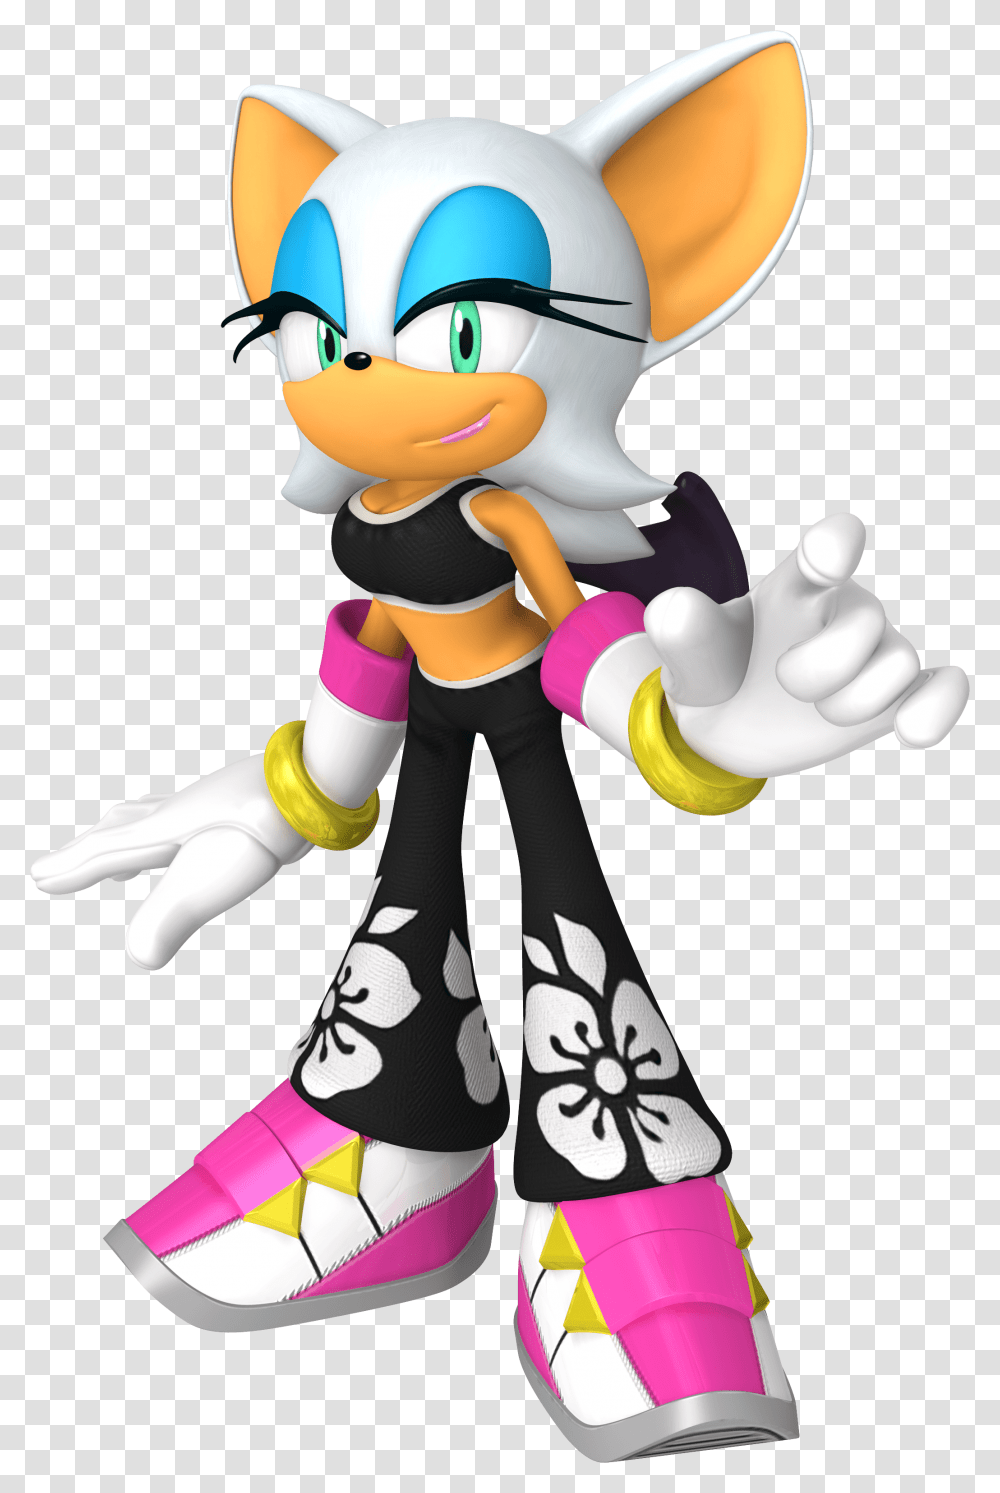 Rouge The Bat Riders, Toy, Mascot, Figurine Transparent Png